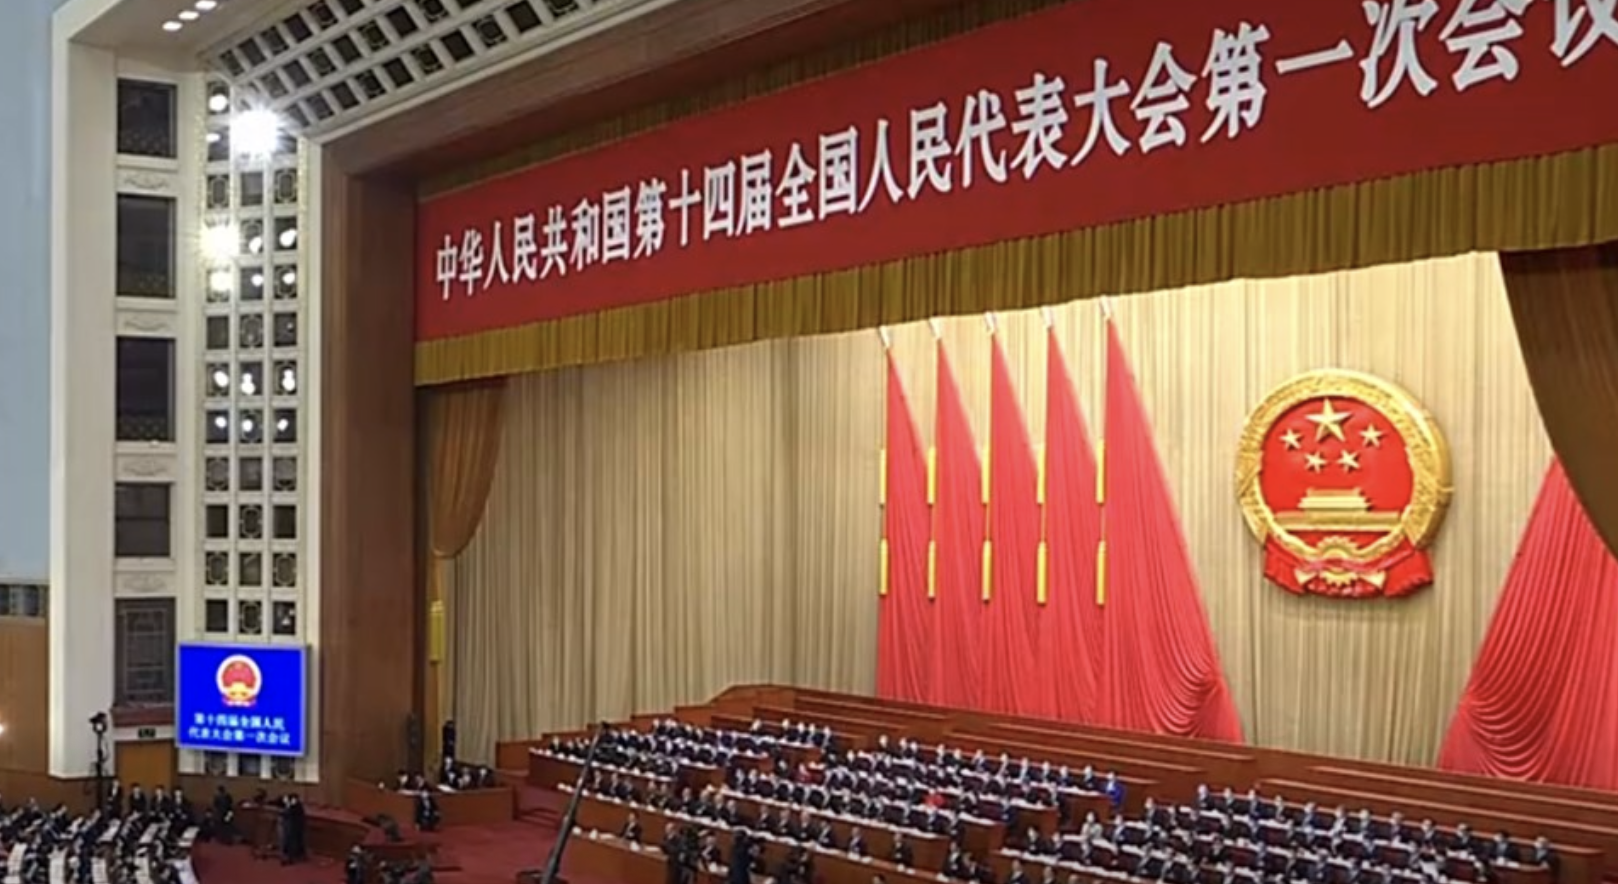 Xi Jinping reelected President; Li Qiang becomes Premier; new central government appointed